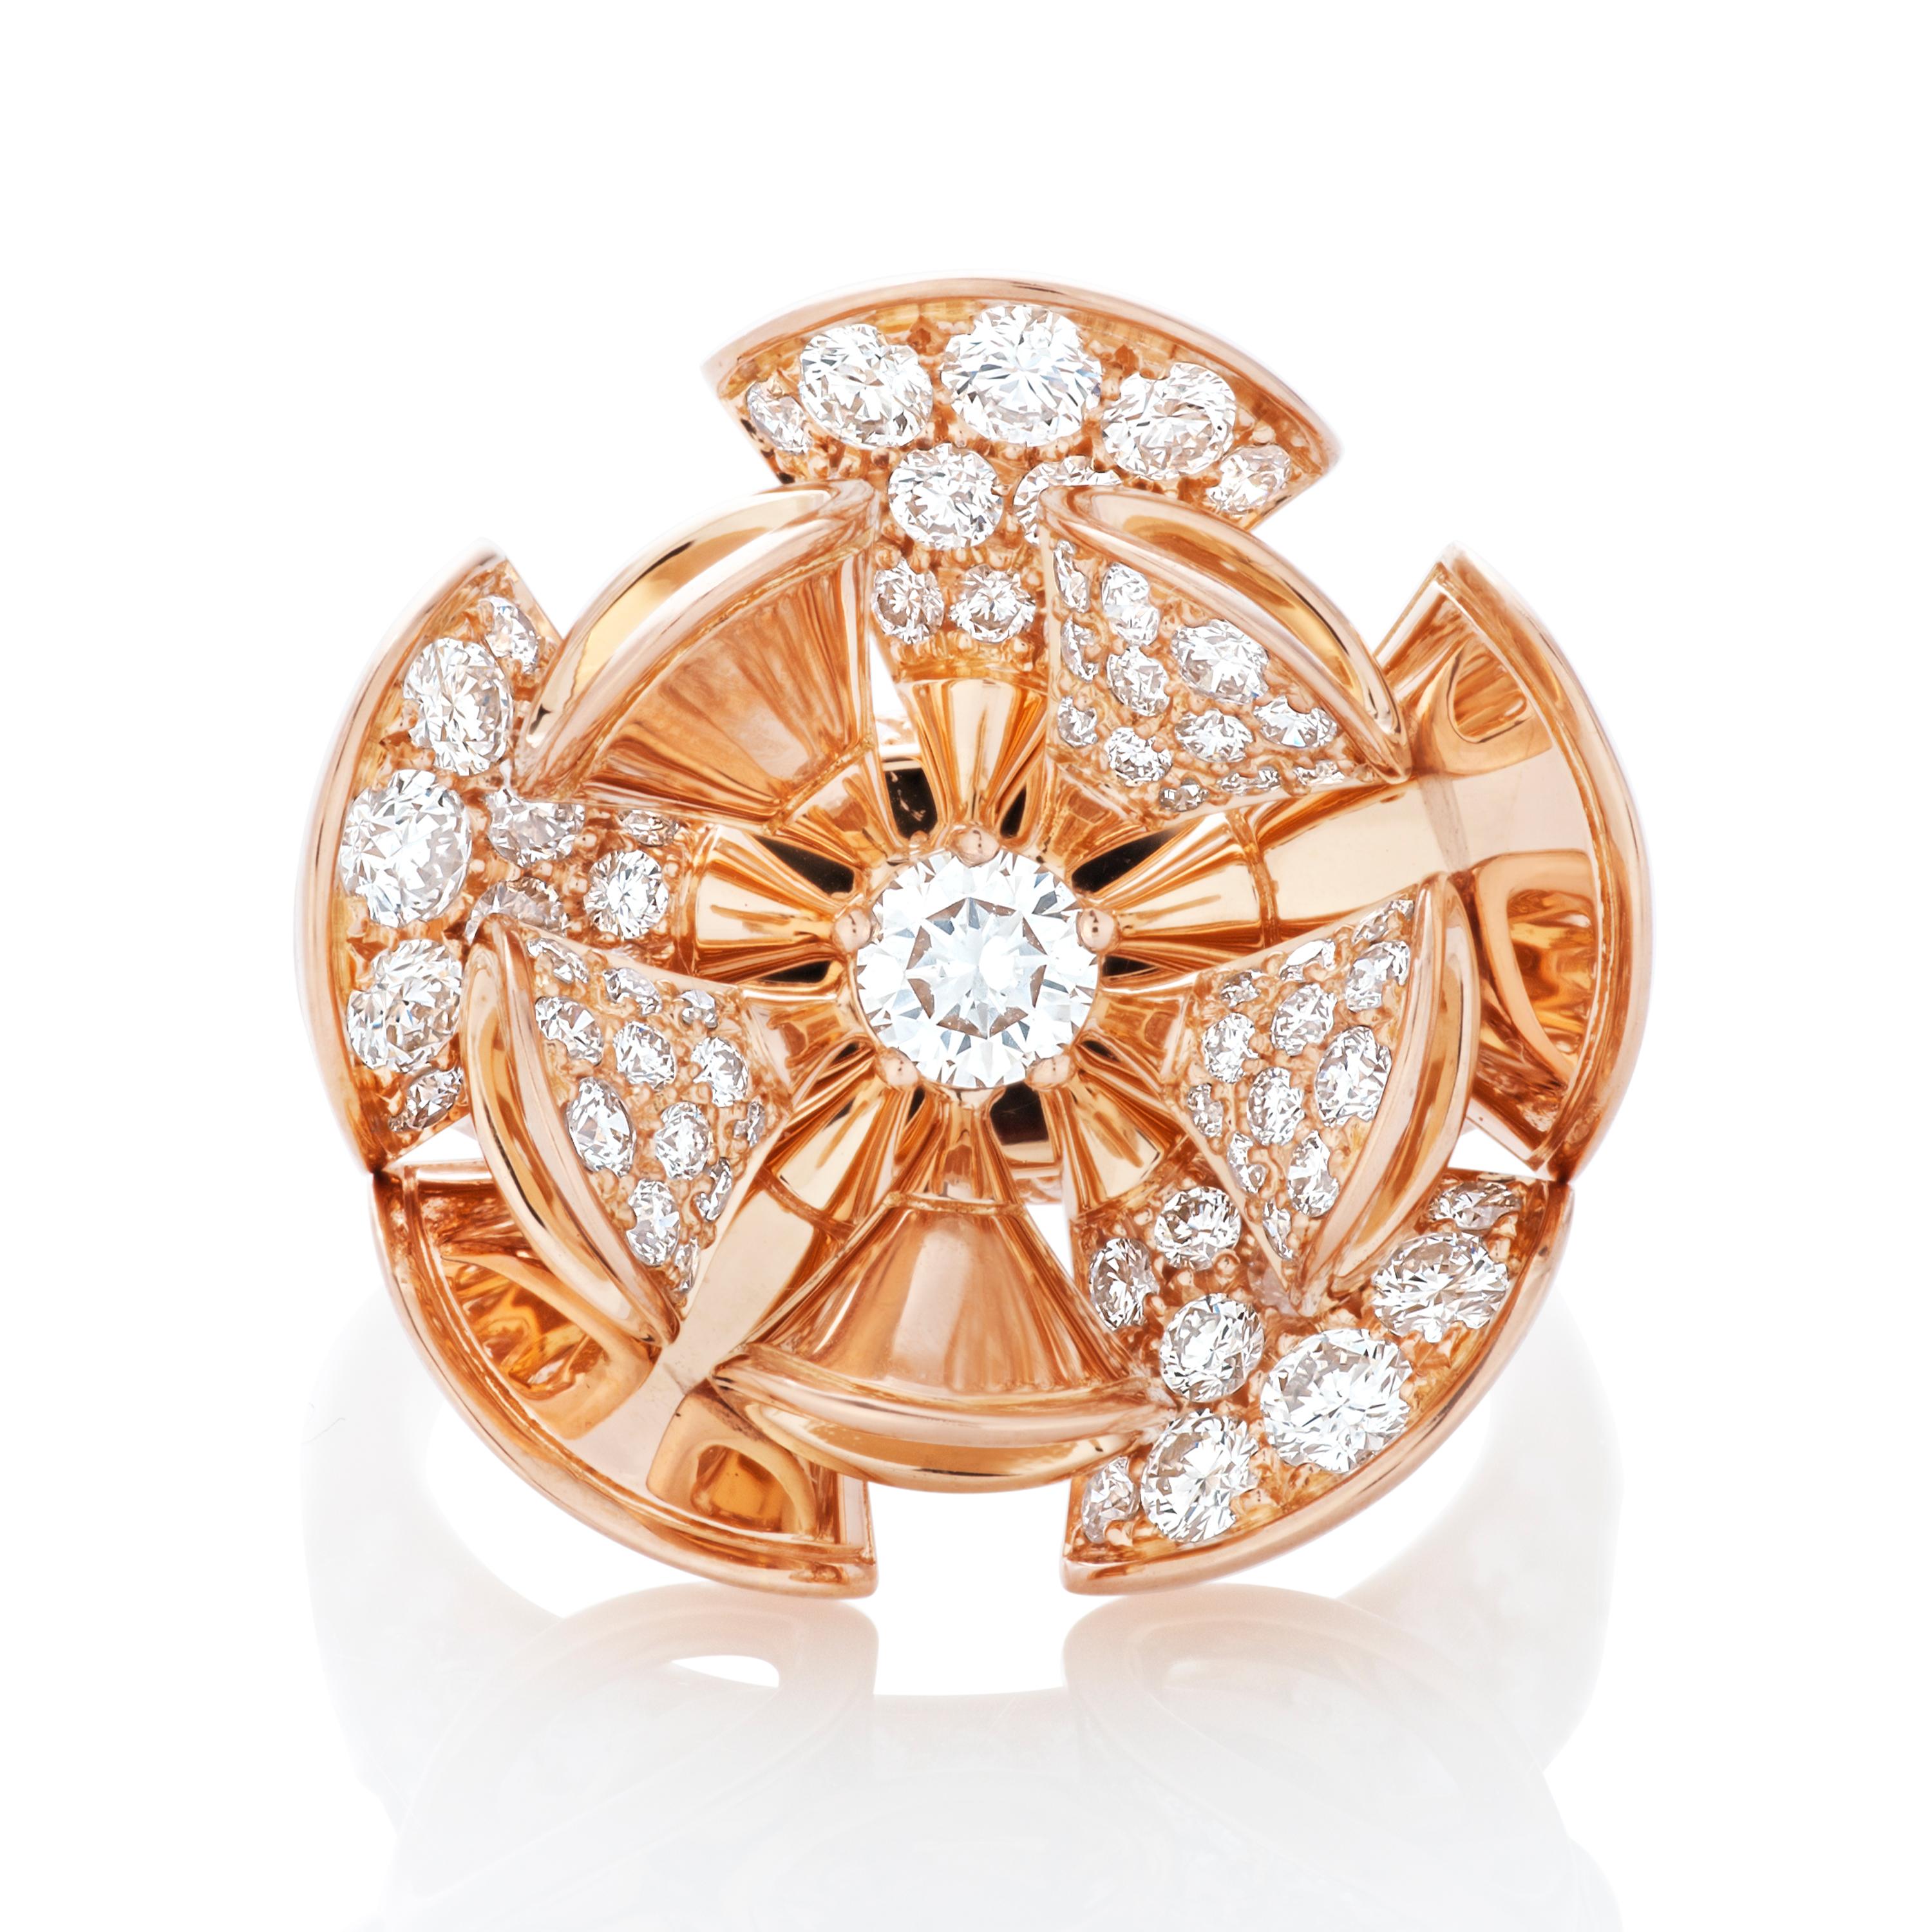 Bulgari Diva's Dream articulating fan ring in 18k rose gold.

This ring features 10 fan motifs set in a flower pattern and contains 117 round brilliant cut diamonds totaling approximately 3.15 carats with E-F color and VS clarity. 

The top of the